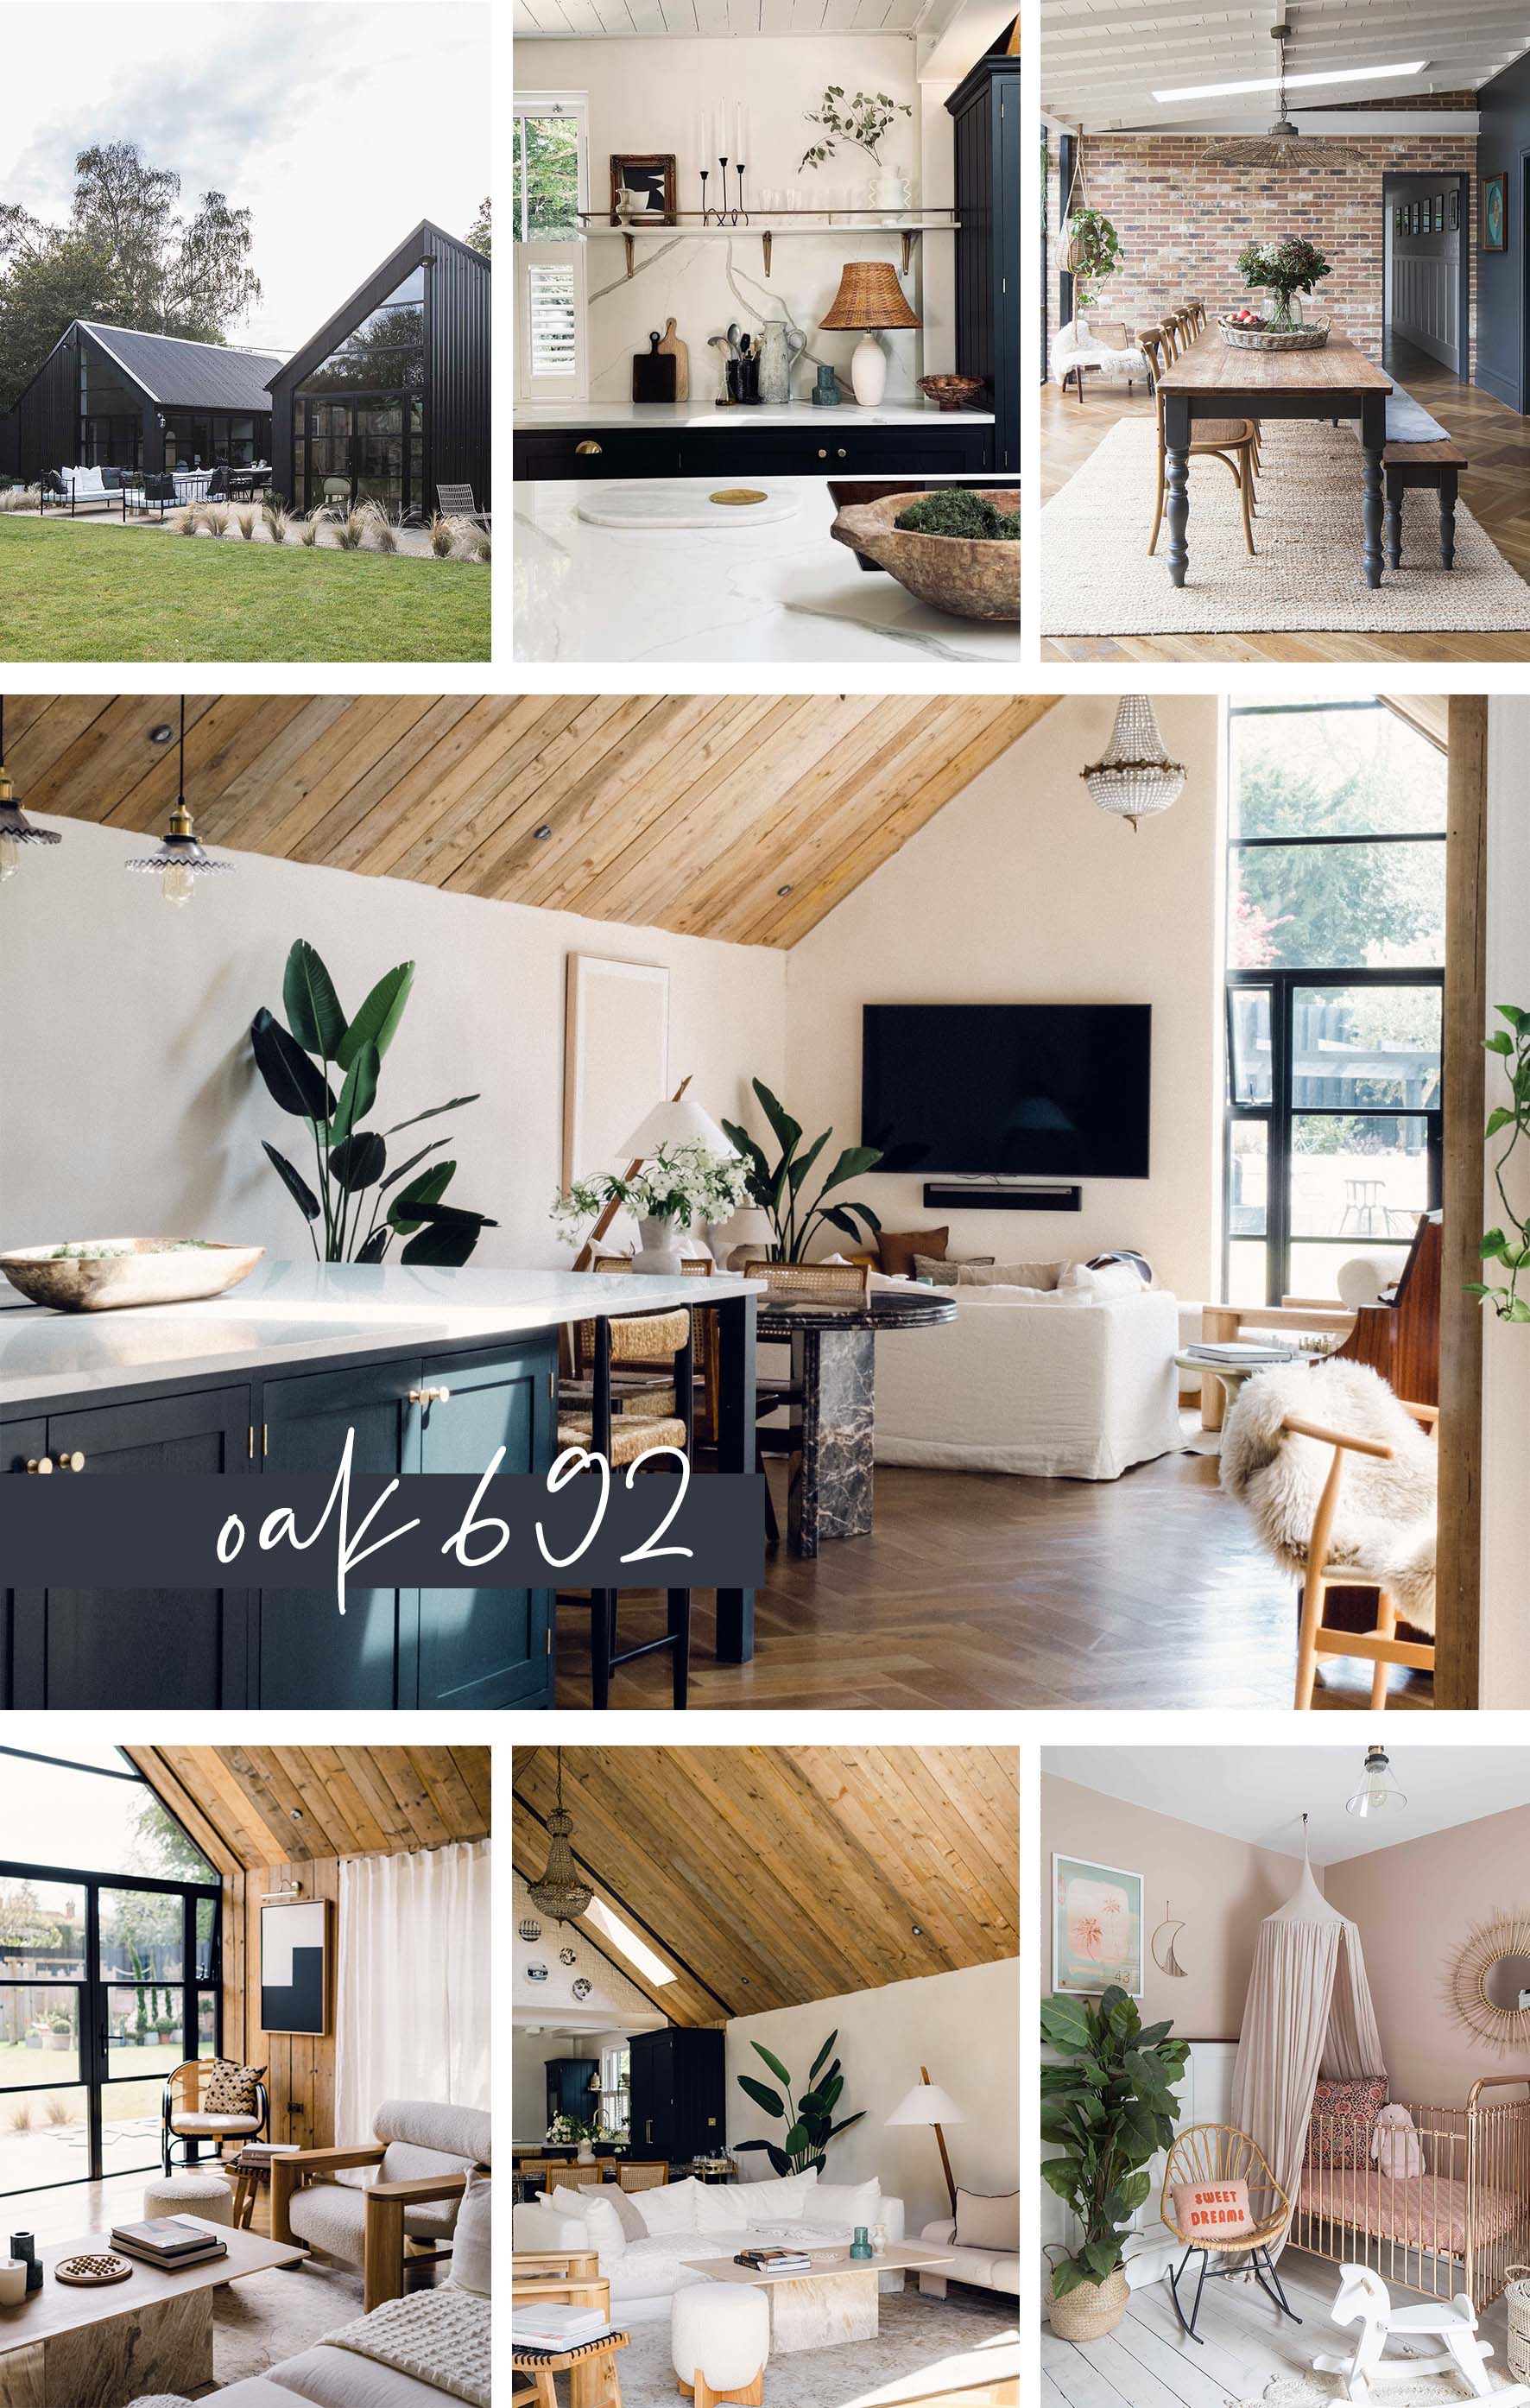 A collection of images representing East Coast Locations OAK692 'Modern & Contemporary' shoot location. A visual tour around this location showcasing it's beautiful exteriors and following through to its open plan living spaces and bedrooms.